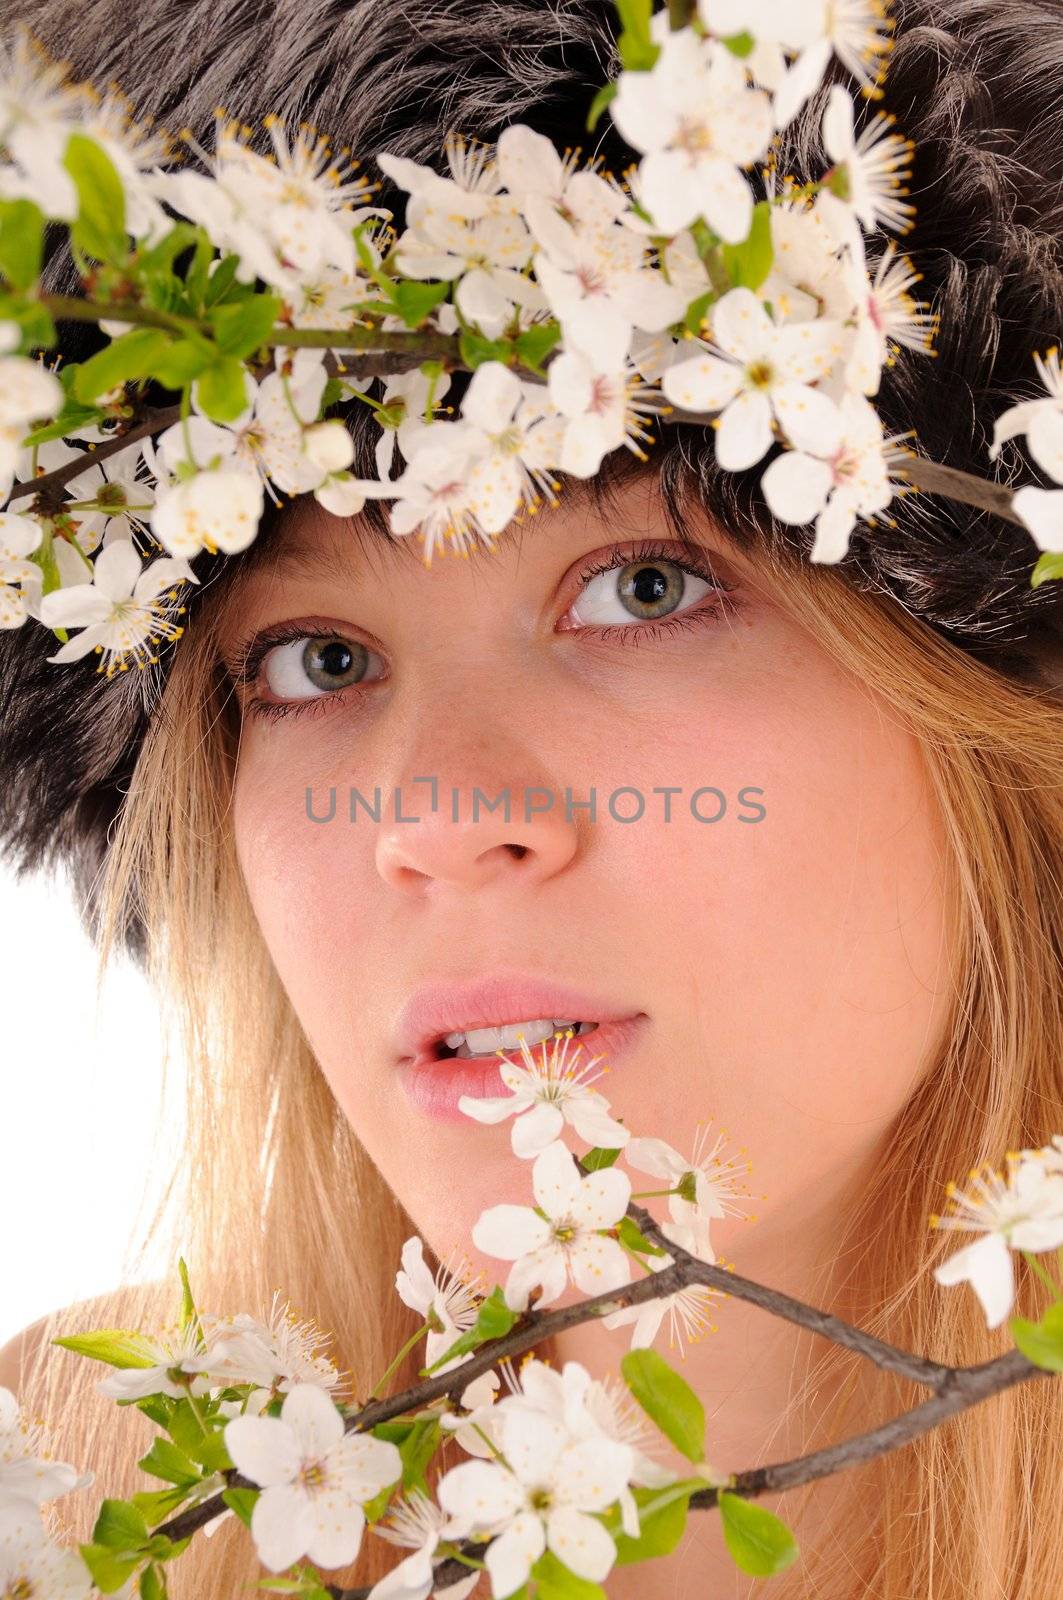 Winter beauty woman looks throught spring white cherry flowers. Focus on woman's eyes.